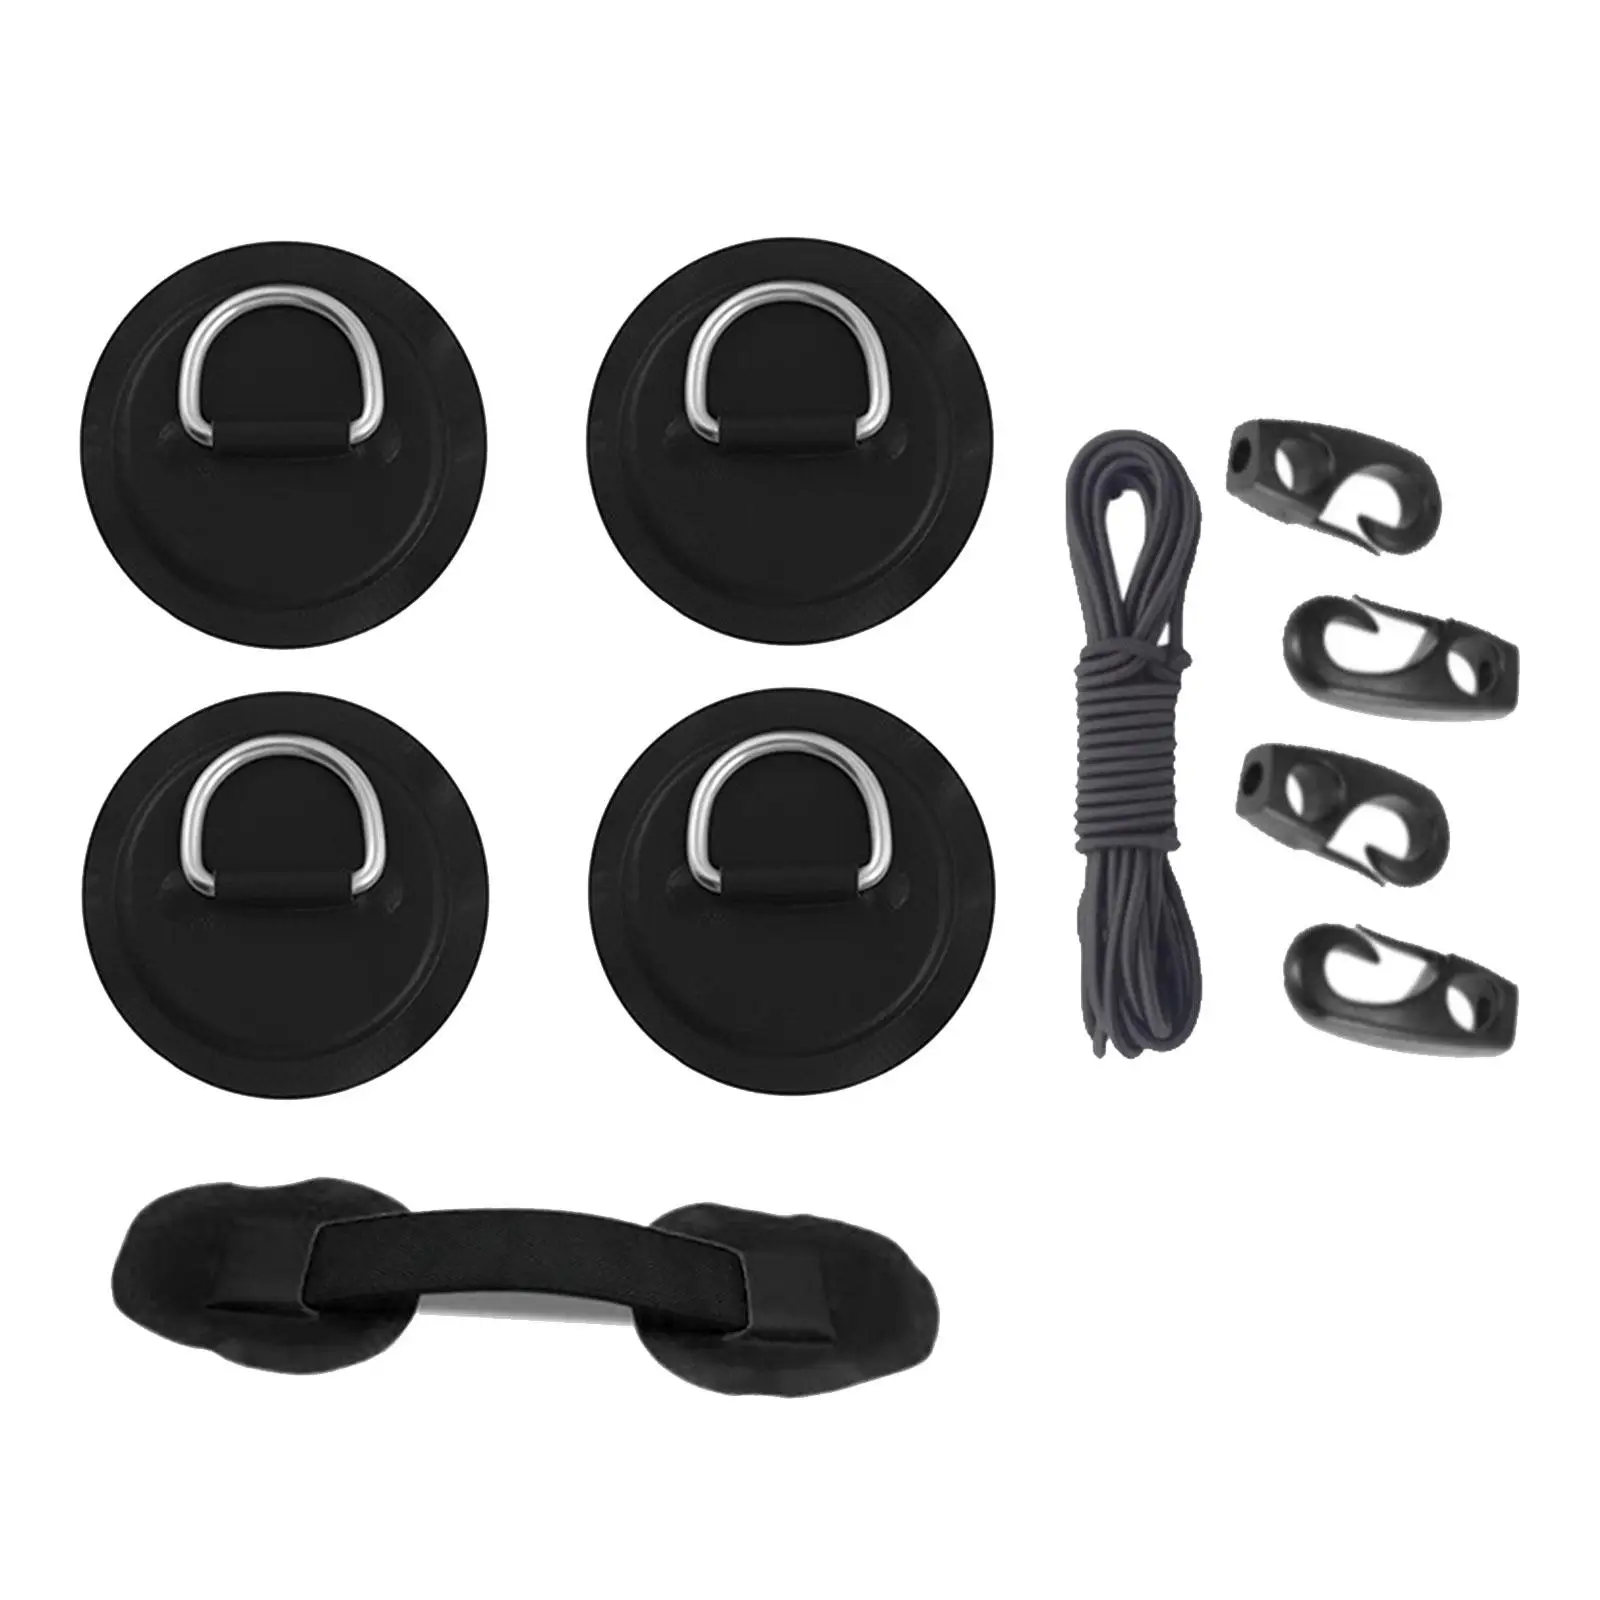 D Ring Pad Patch Bungee Accessories Set for Kayak Canoe Deck Accessory